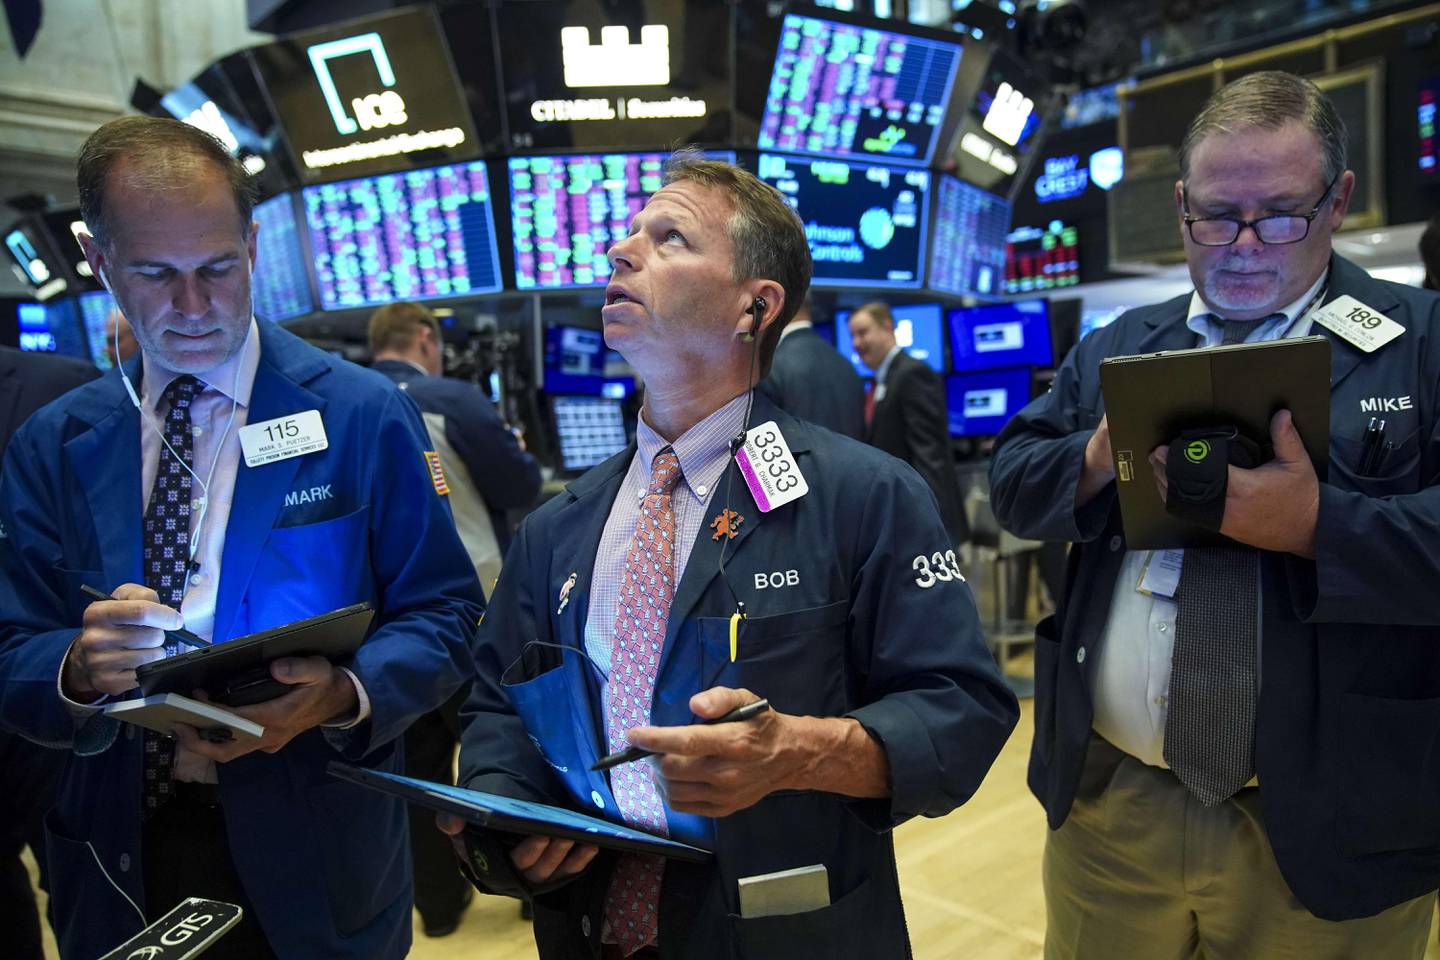 NEW YORK, NY - AUGUST 13: Traders and financial professionals work on the floor of the New York Stock Exchange (NYSE) at the opening bell on August 13, 2019 in New York City. The Dow Jones Industrial Average jumped up 400 points in early trading on Tuesday, led by Apple after the Trump administration said it will delay tariffs on some items, initially set to go into effect on September 1, until December 15.   Drew Angerer/Getty Images/AFP
== FOR NEWSPAPERS, INTERNET, TELCOS & TELEVISION USE ONLY ==